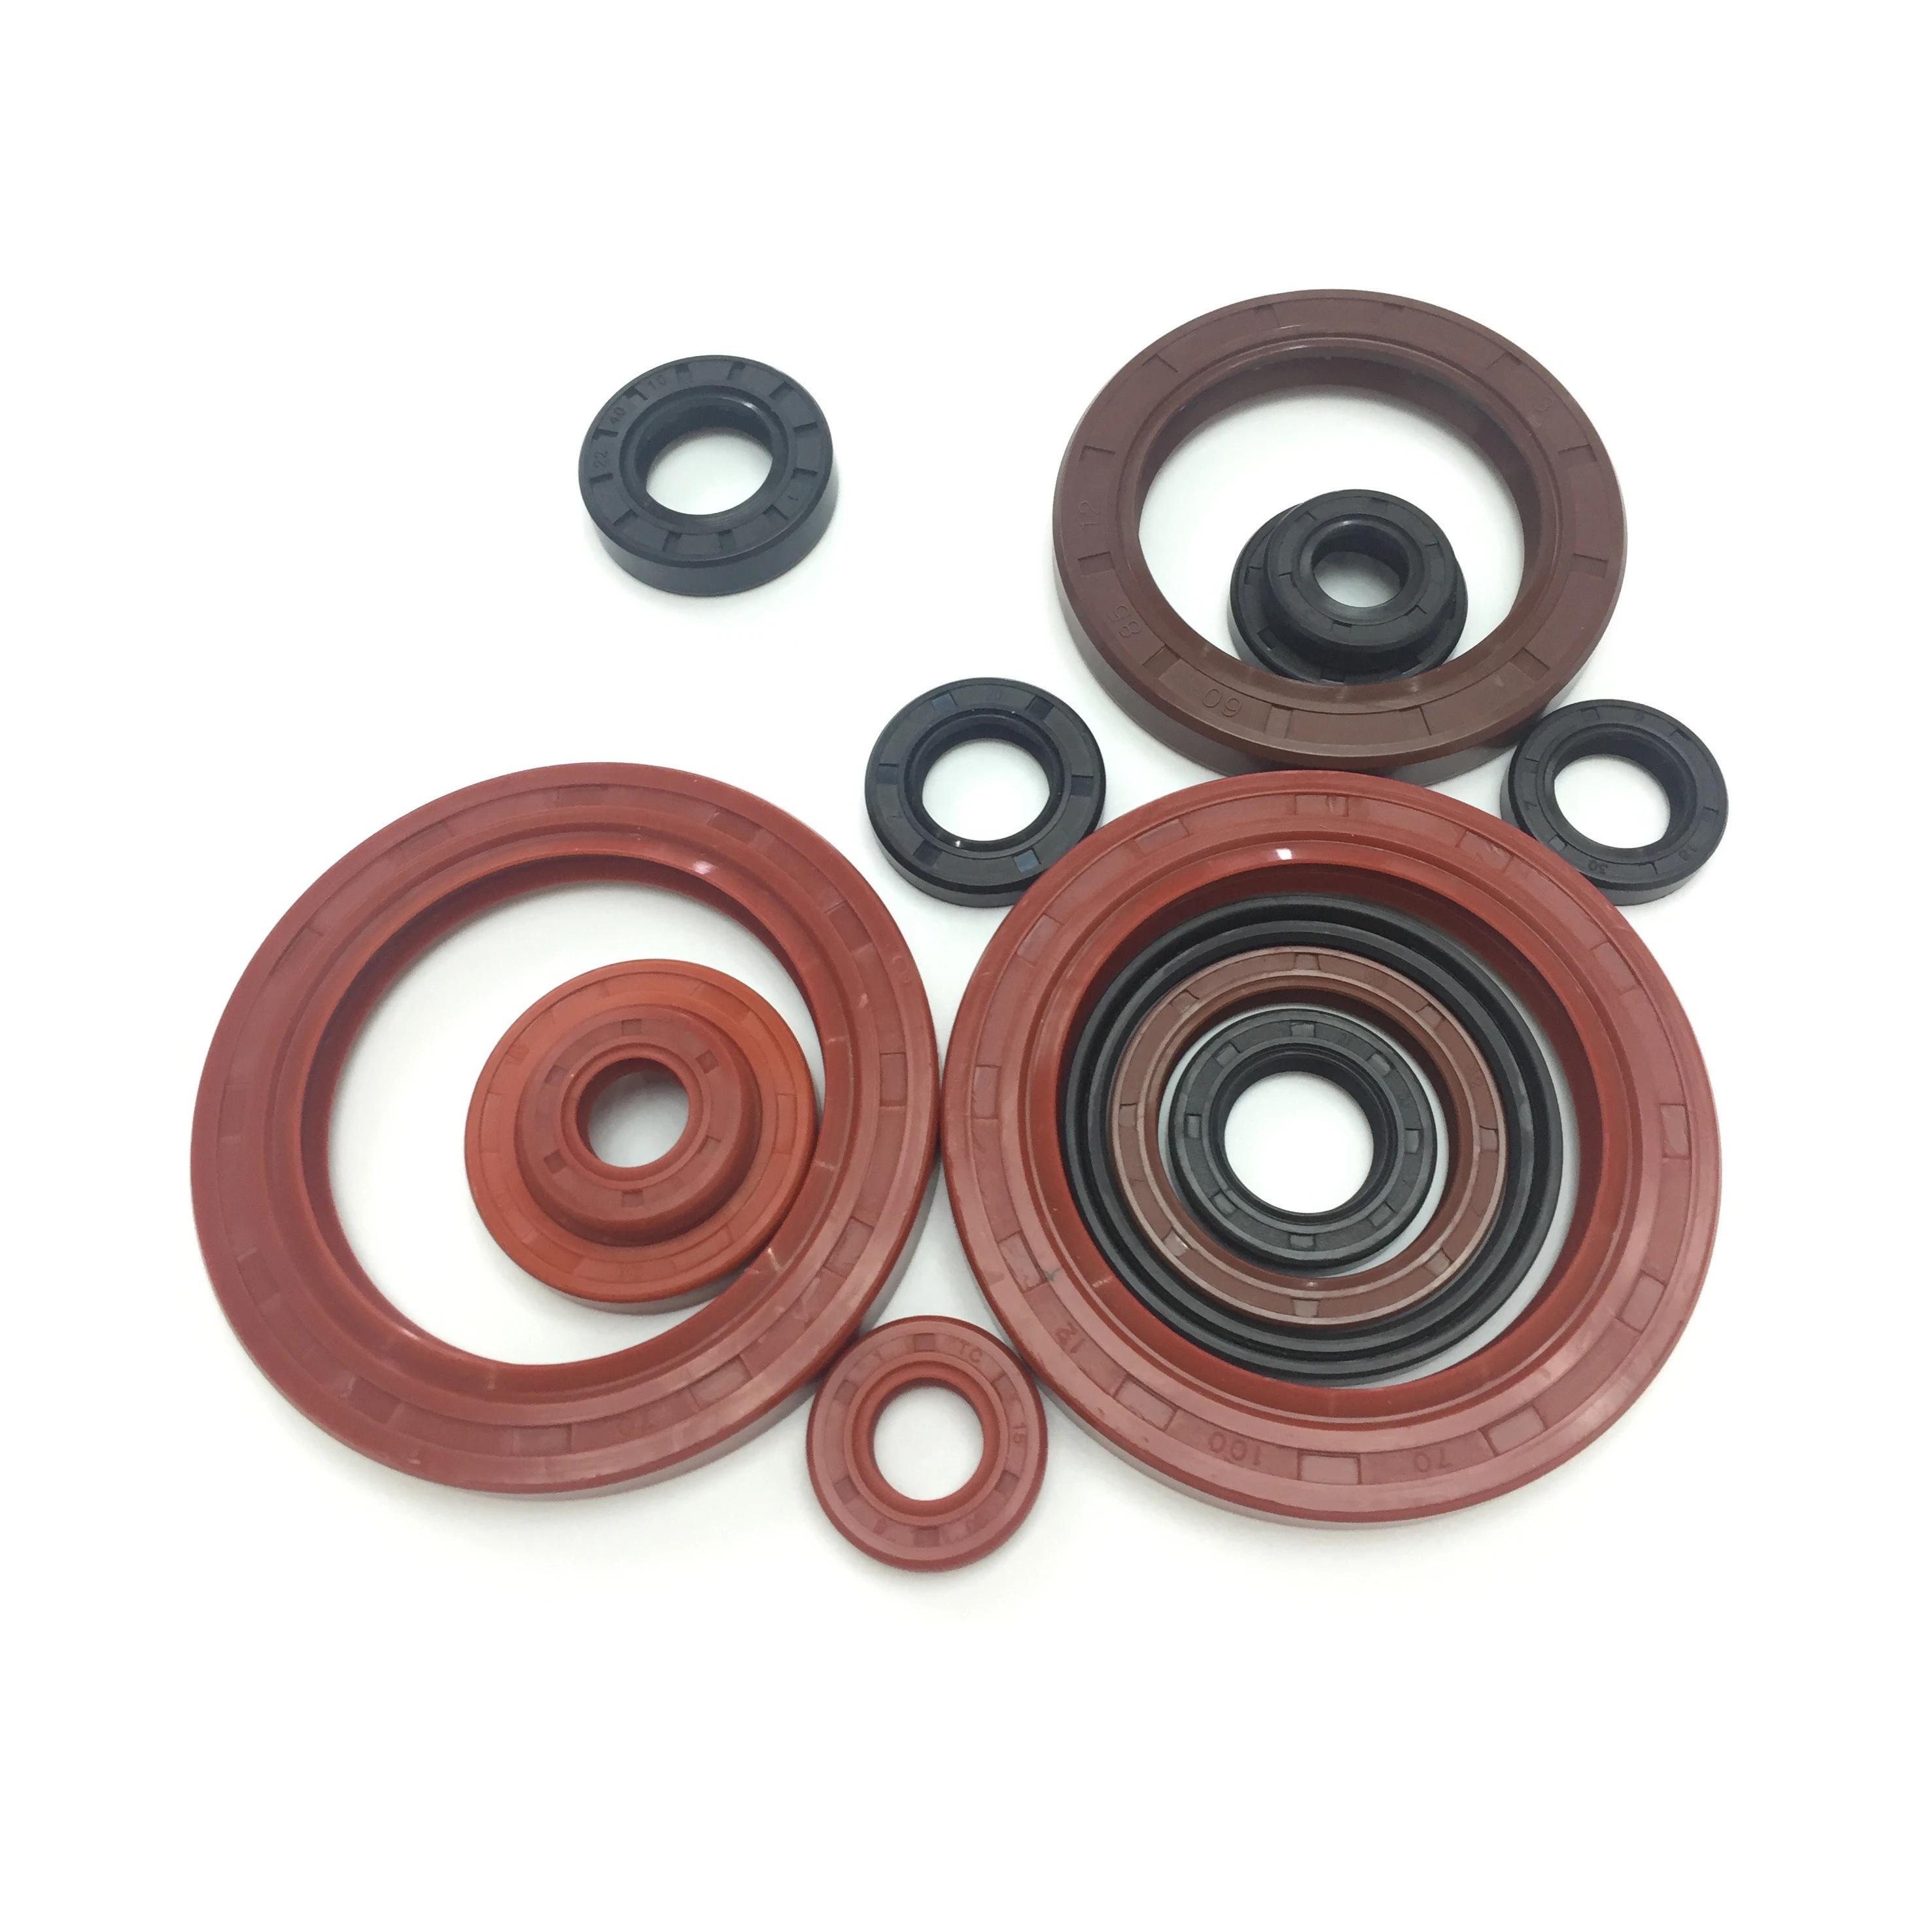 Water And Dust Nonstandard Oil Seal In Nbr Fkm Acm For Auto Motors